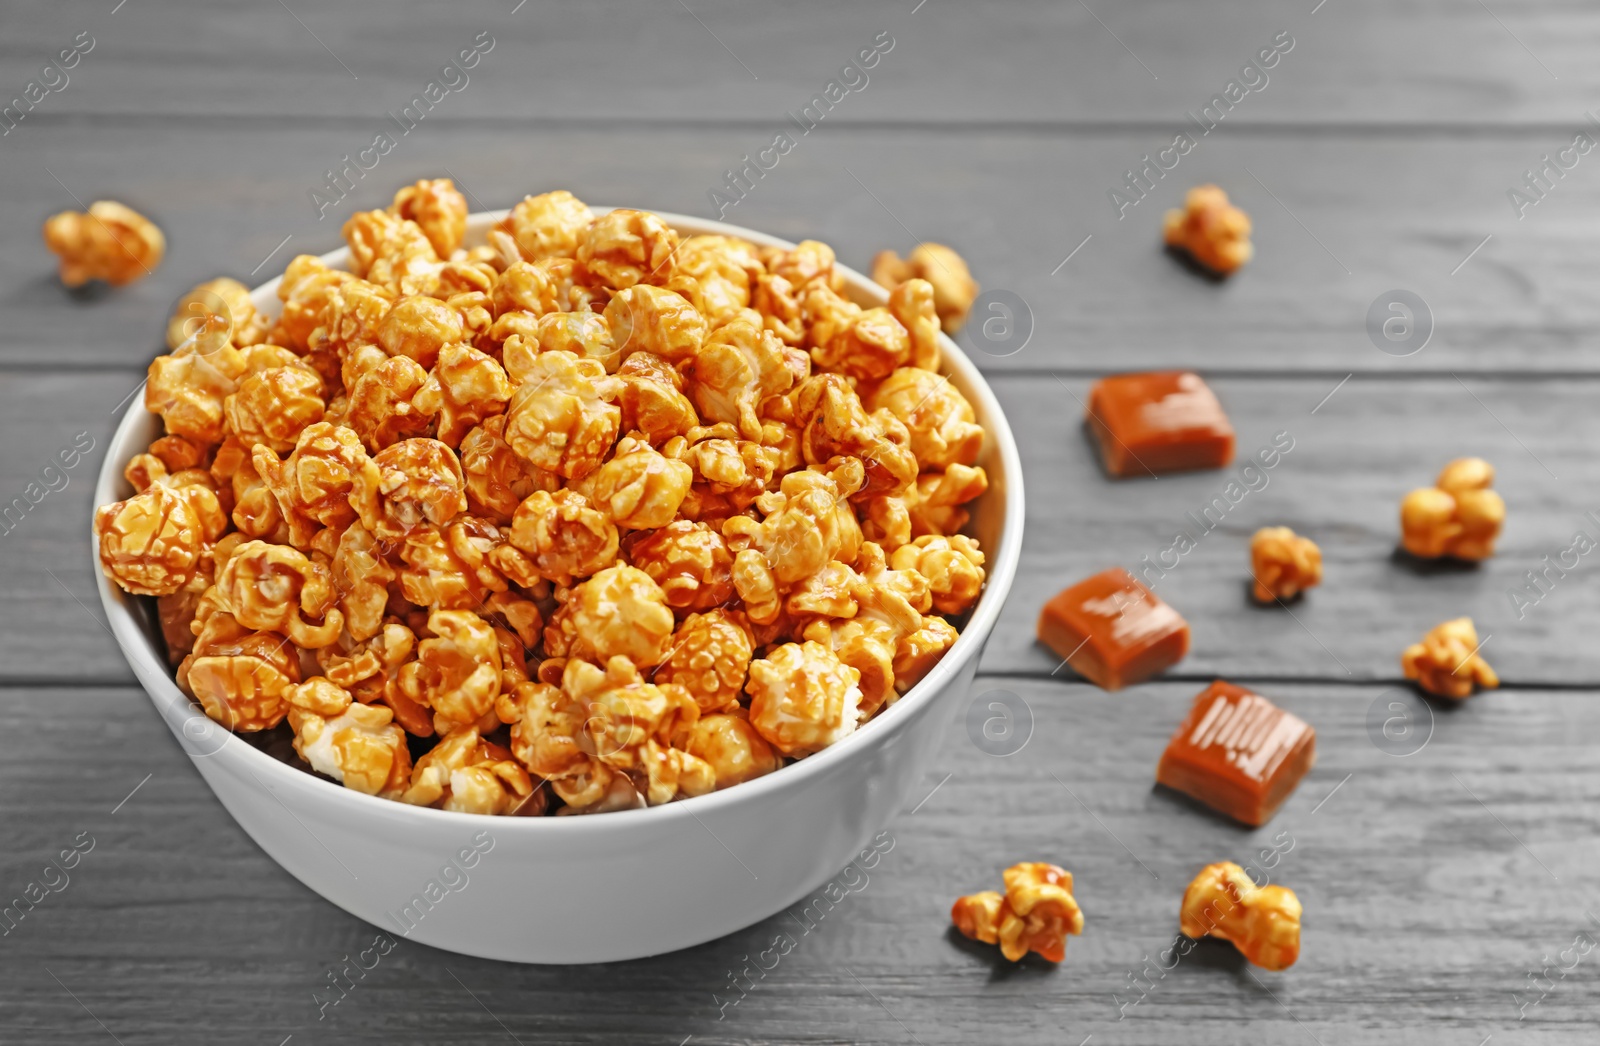 Photo of Delicious popcorn with caramel in bowl on table